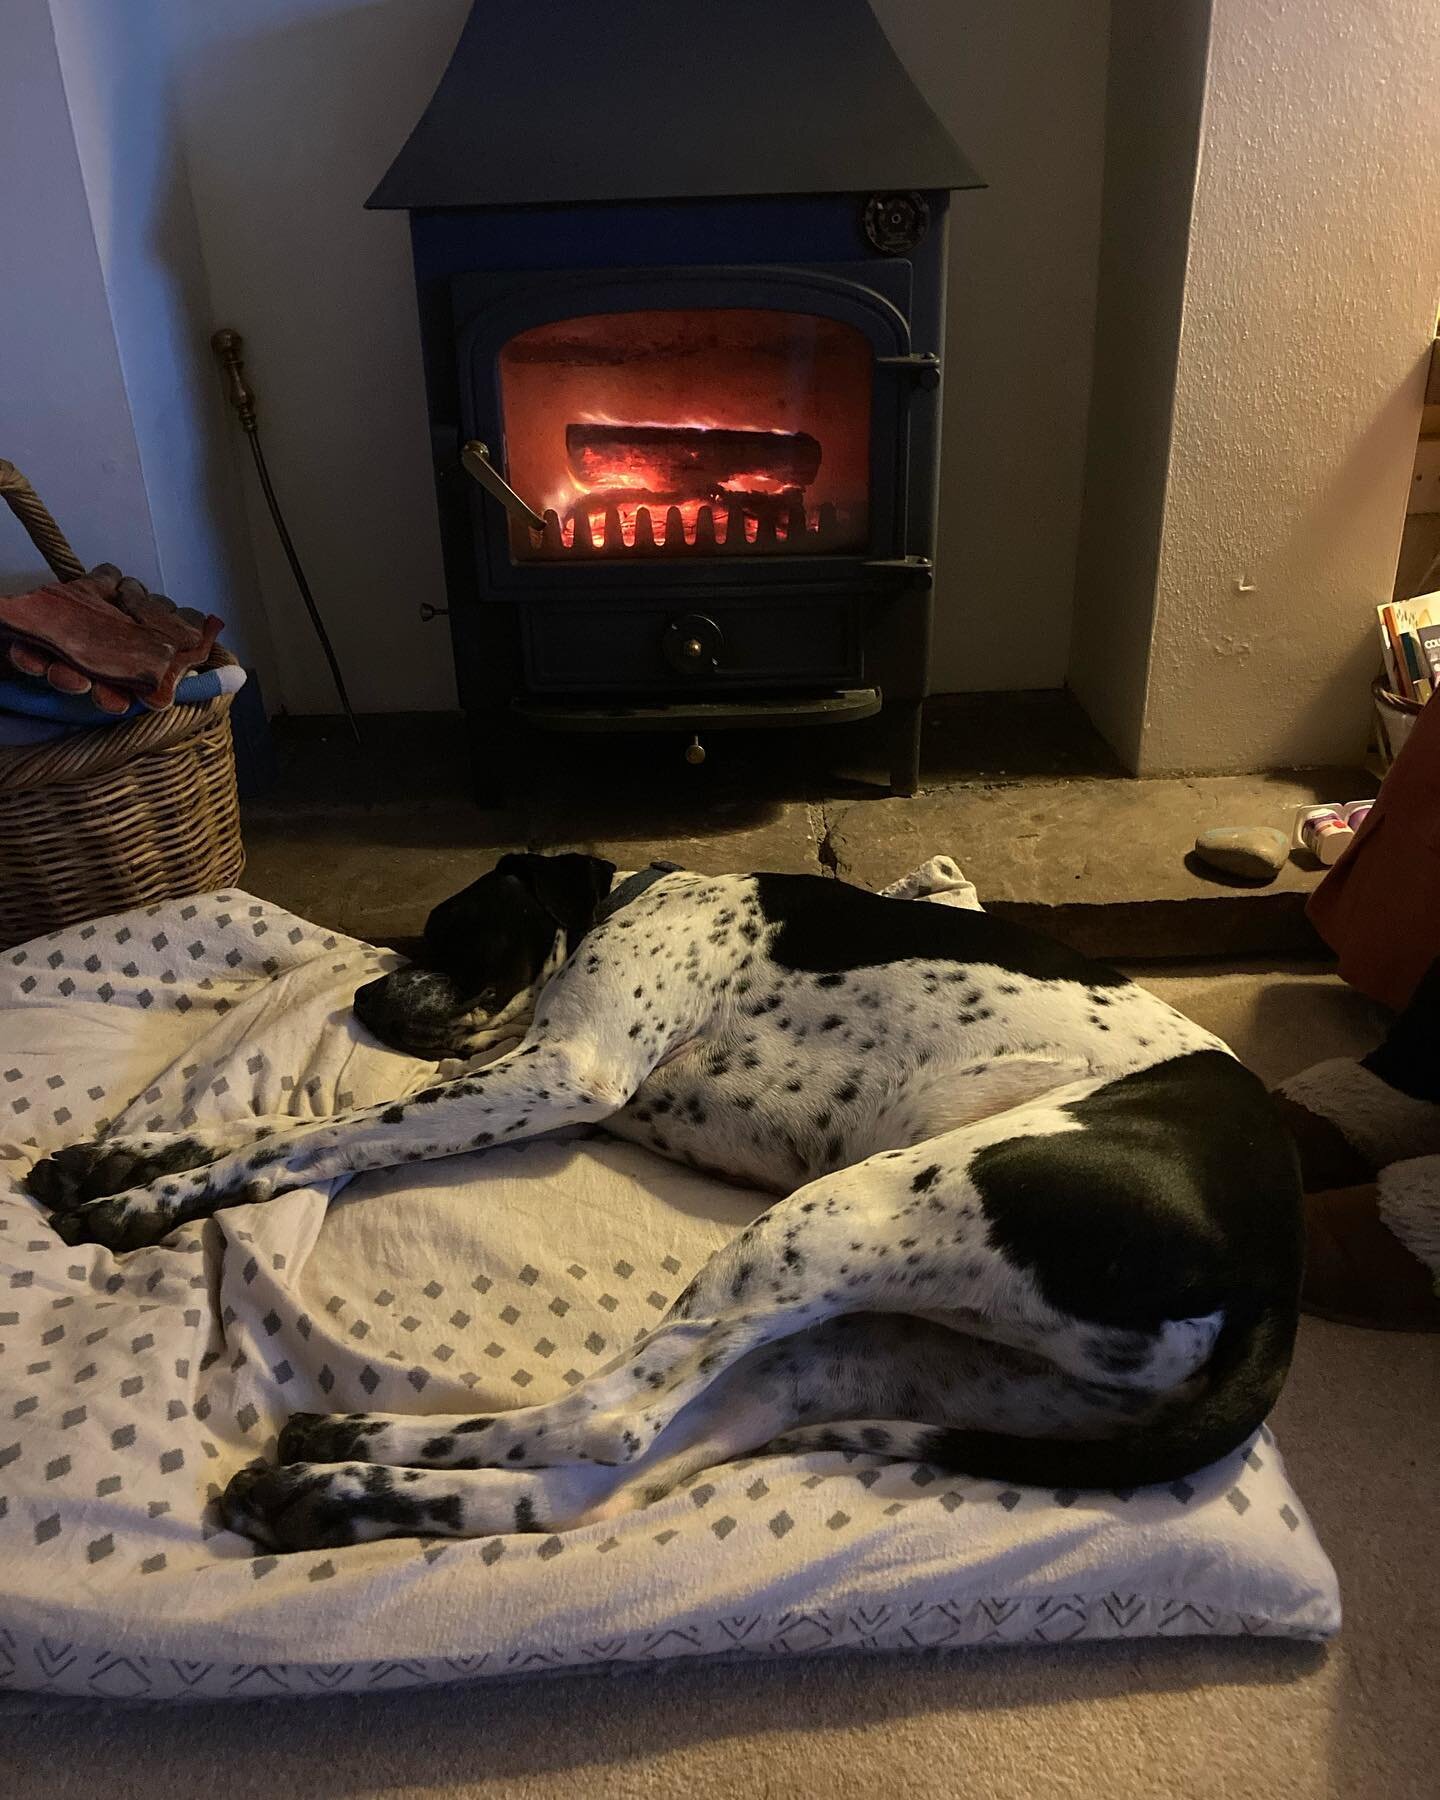 We were so happy to make this dogs day today! Old flue liner removed and a new one fitted so someone could be back in their favourite spot!
#happydoghappylife #allinadayswork #flueliner #herefordshirecountrylife #herefordshirelife #herefordshirebusin